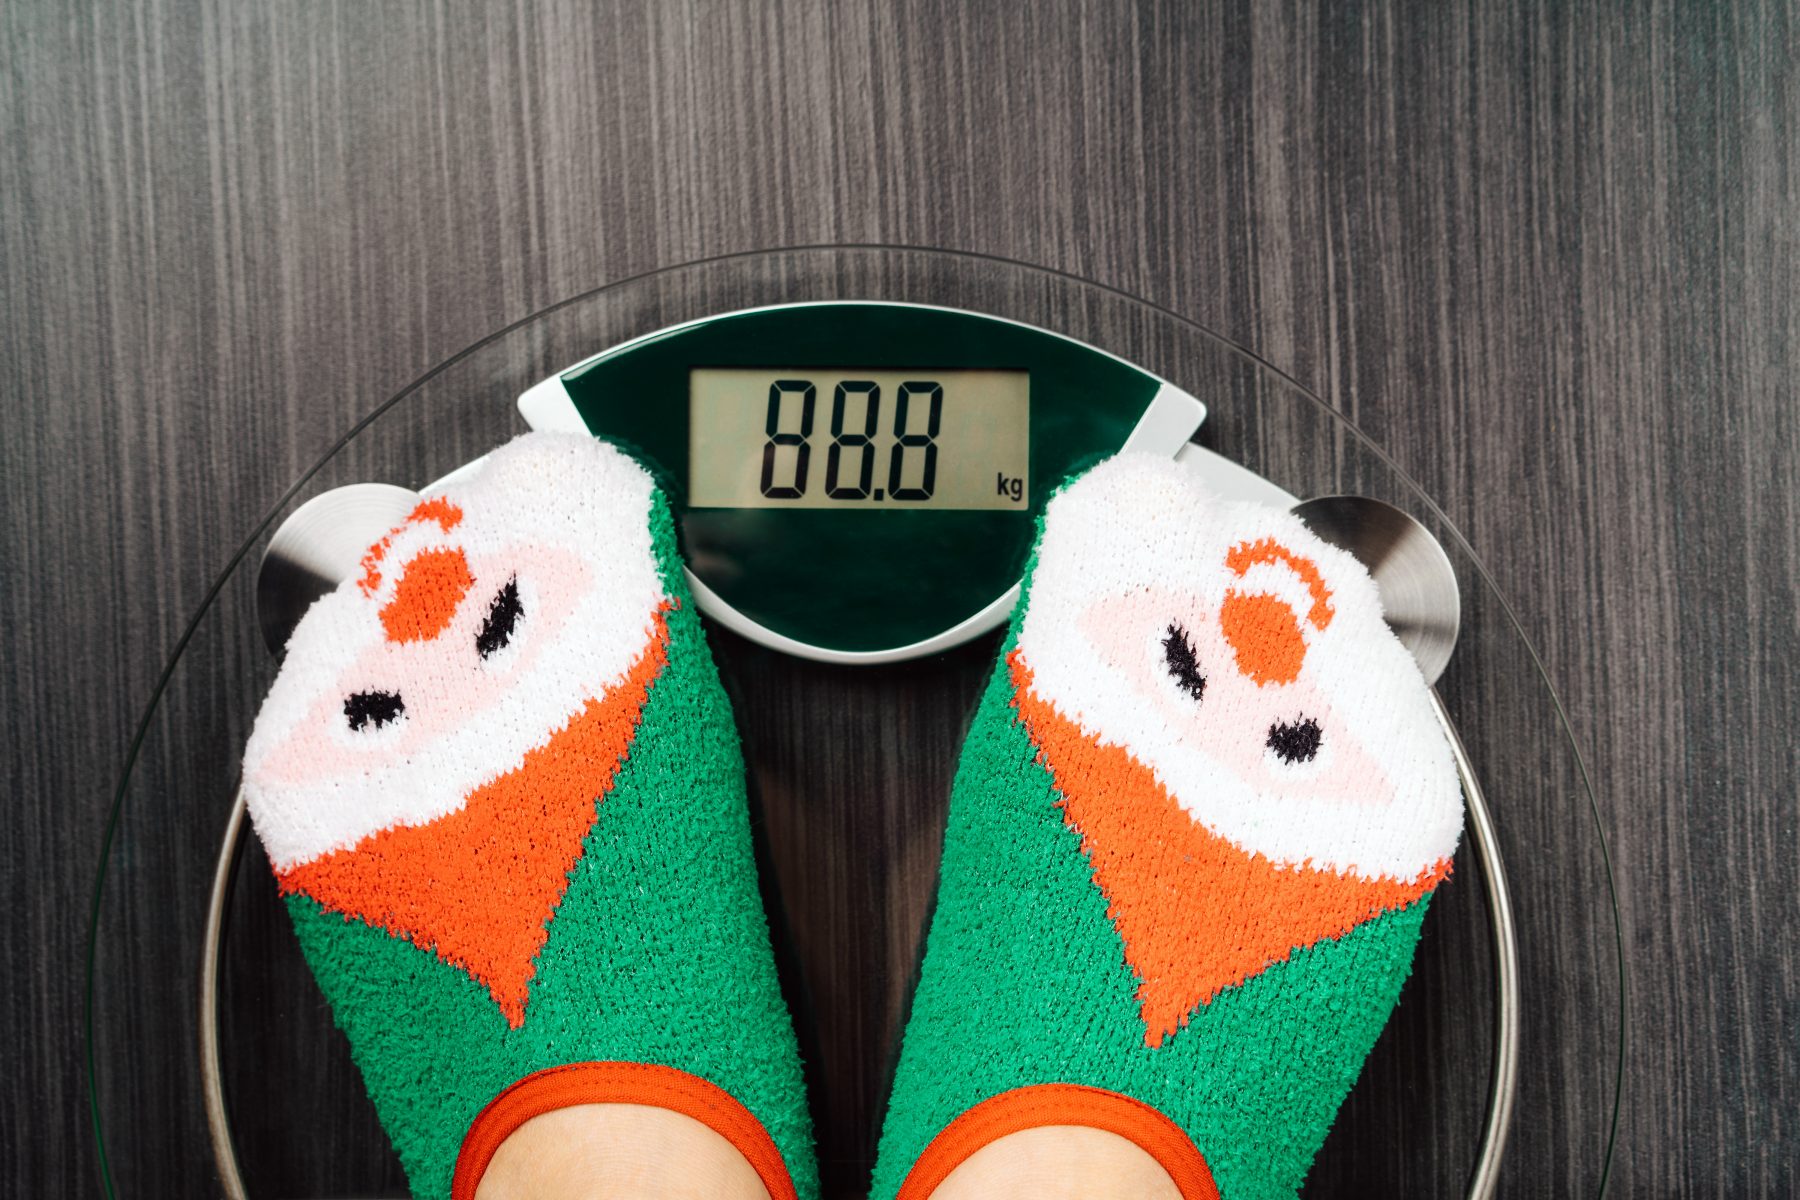 How to Make Merry Without Maximizing Weight